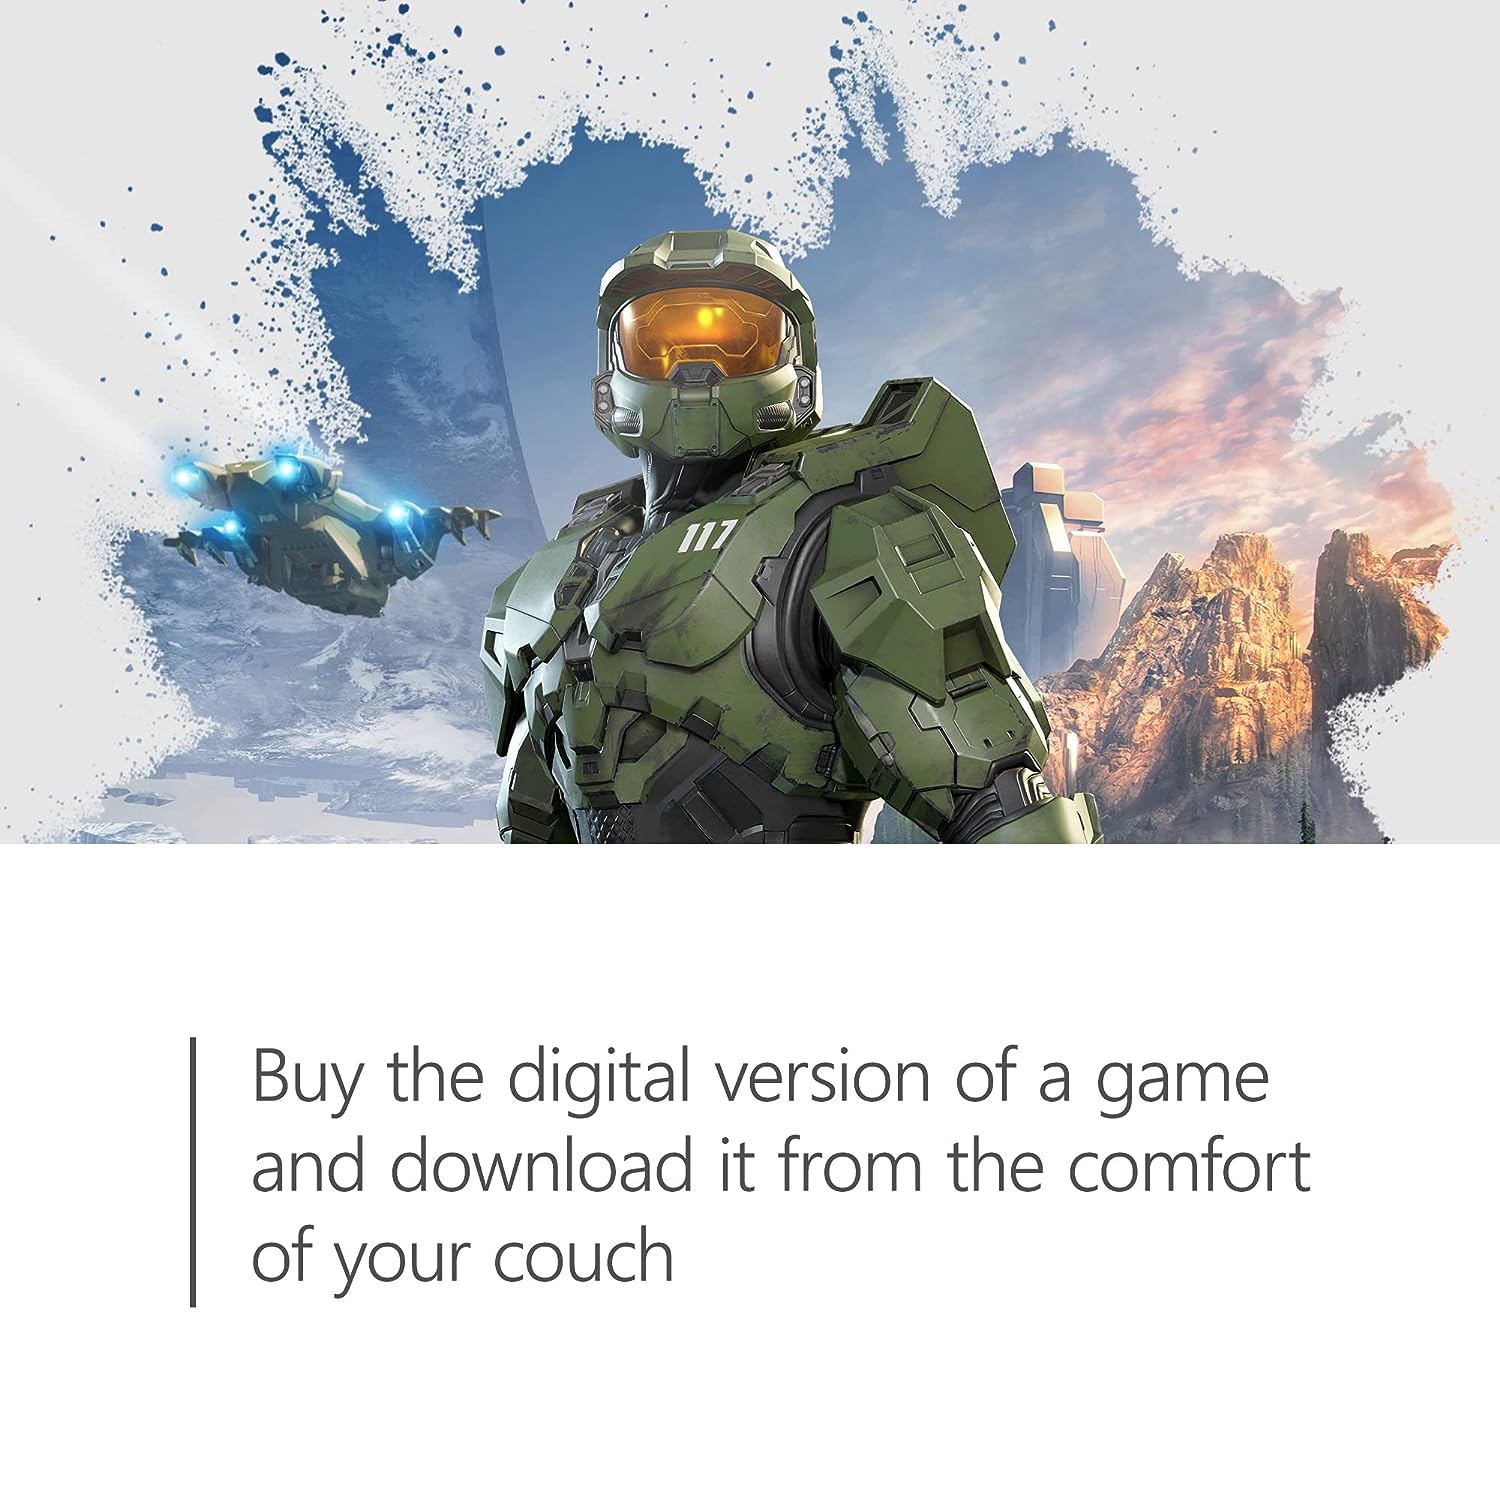 $15 Xbox Digital Gift Card | Buy the digital version of a game and download it from the comfort of your couch.